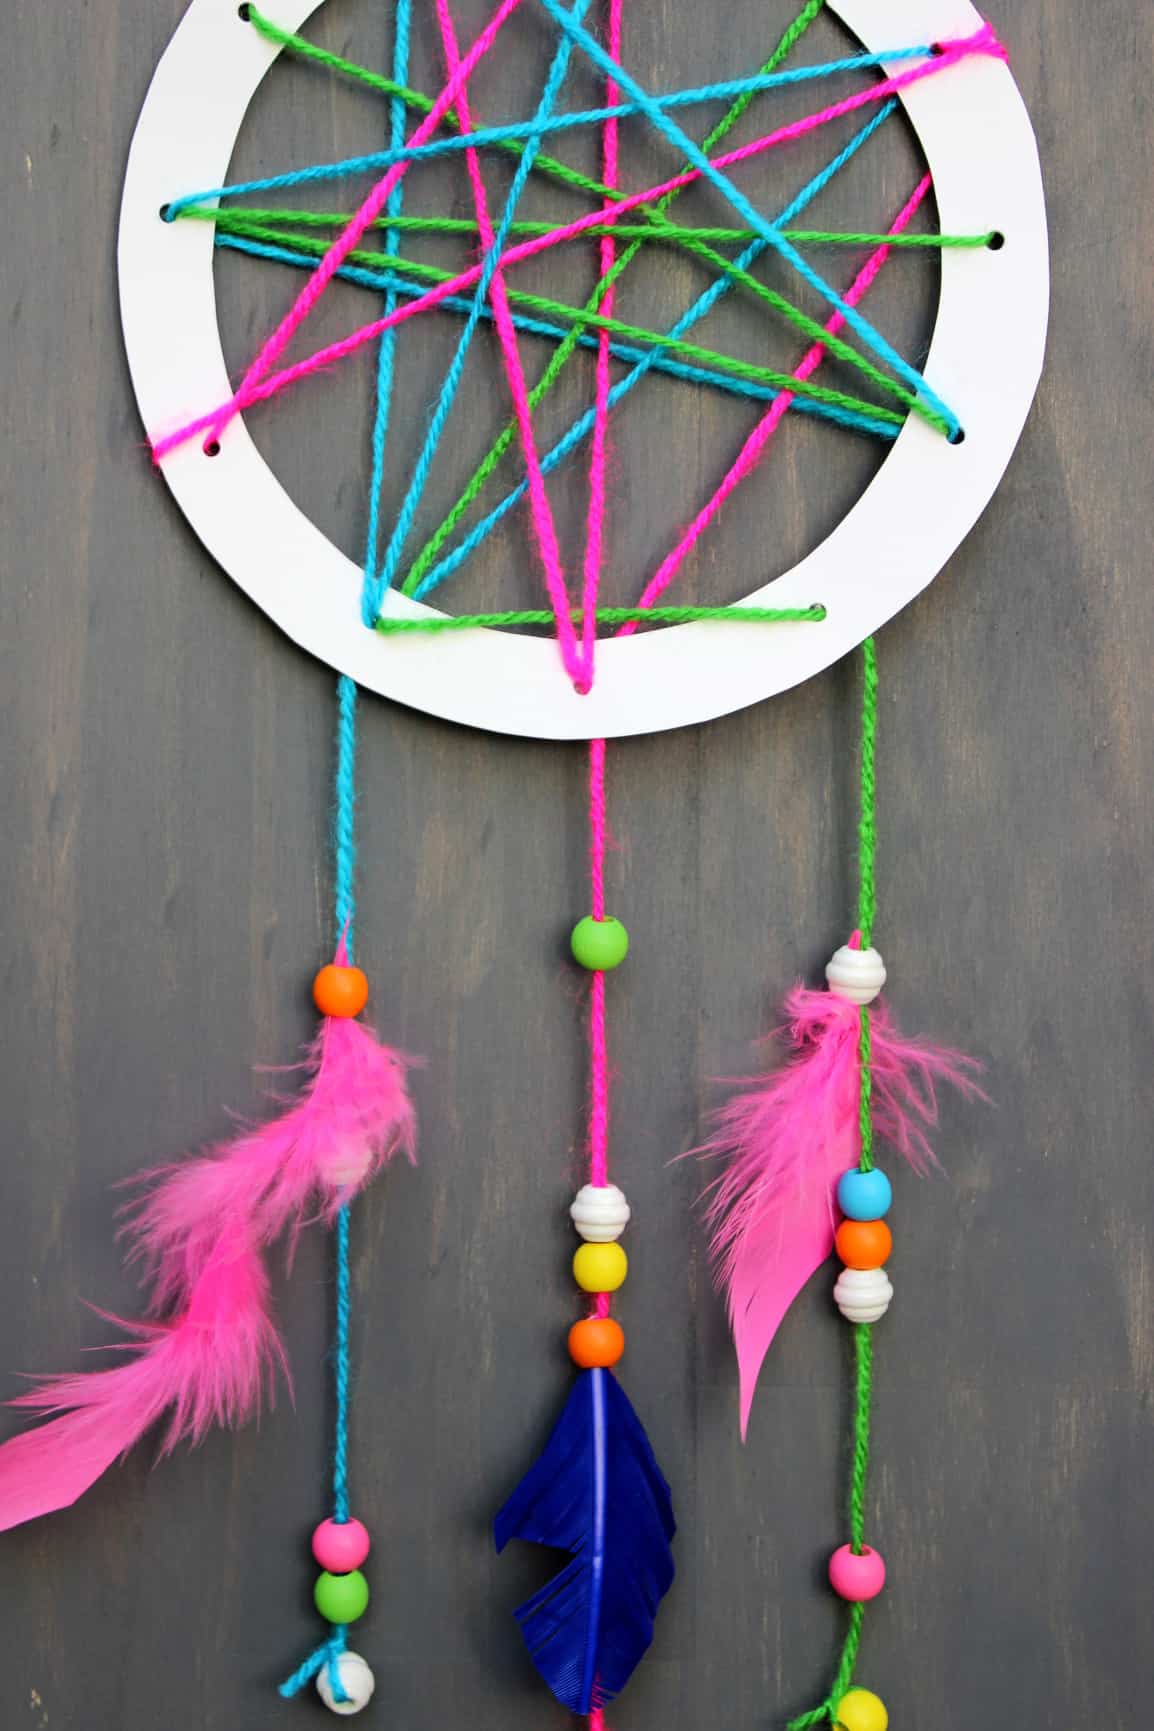 image shows a dreamcatcher made from colorful yarn, feathers, and beads.